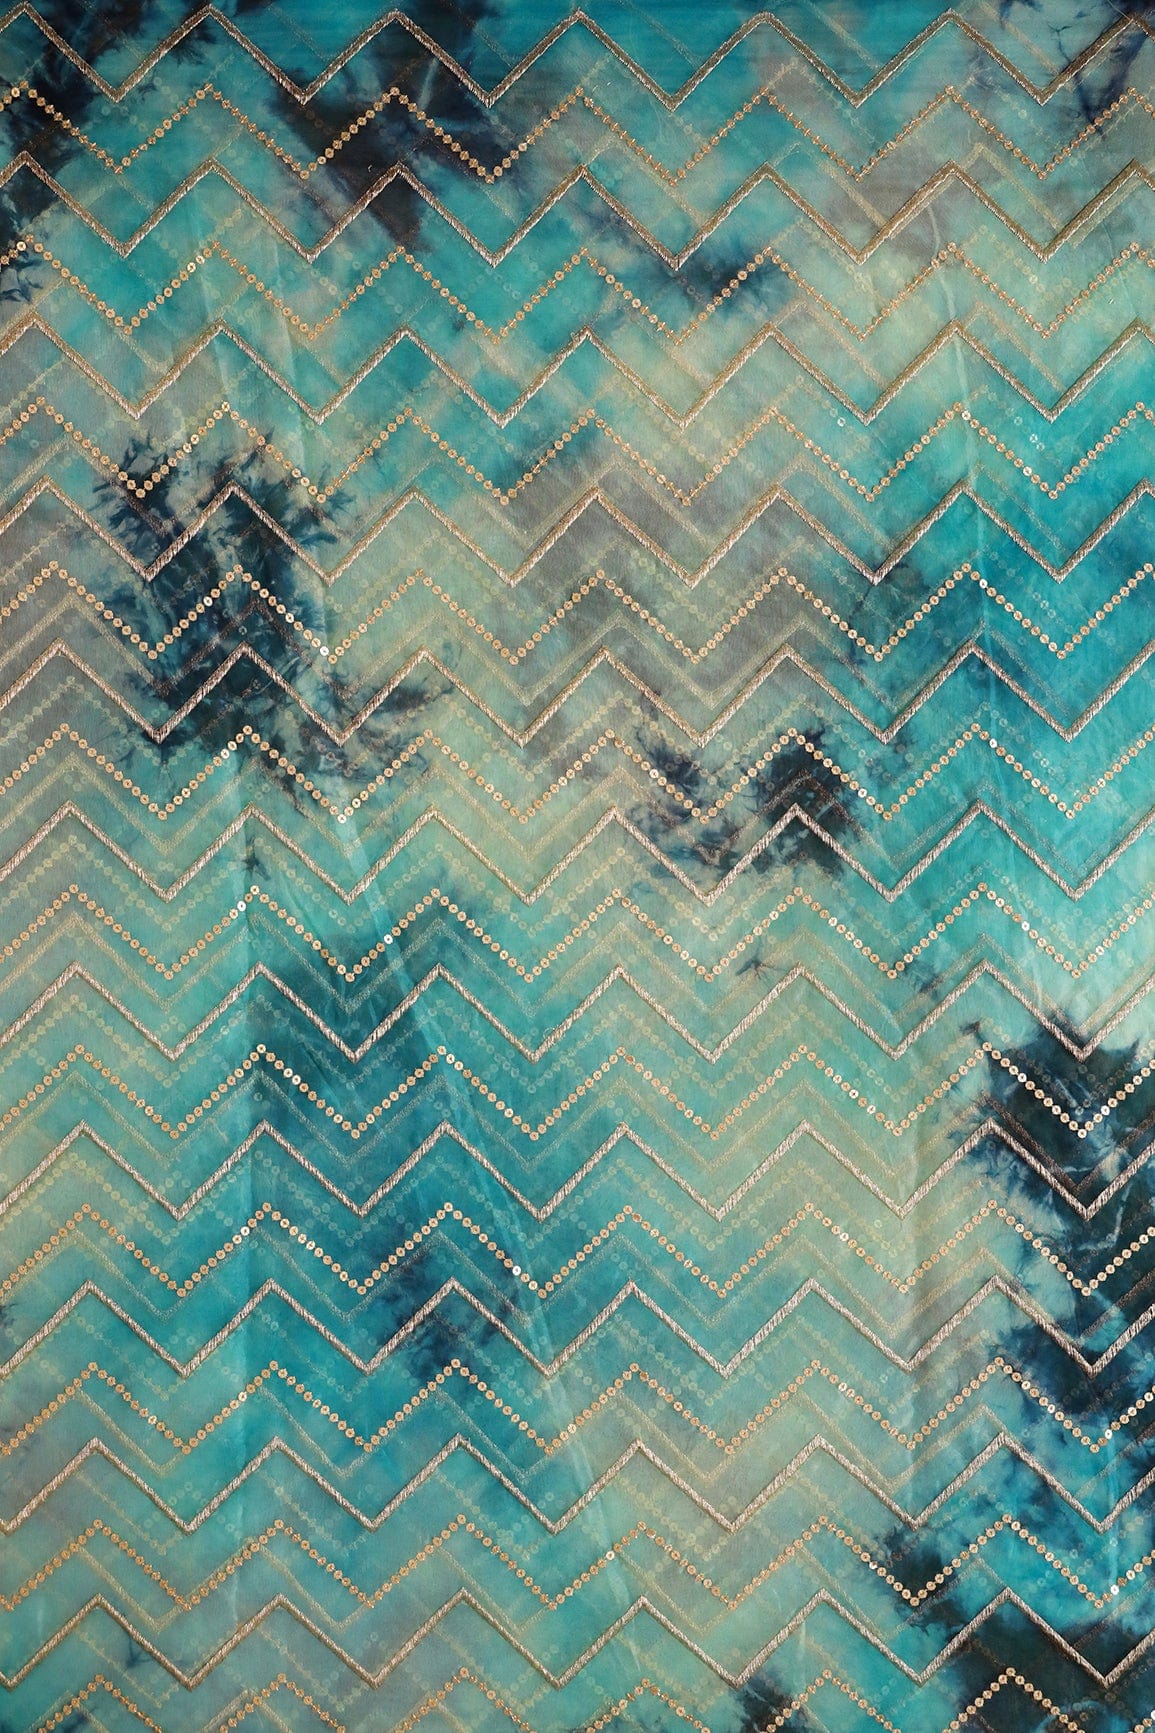 doeraa Embroidery Fabrics 1 Meter Cut Piece Of Gold Zari With Gold Sequins Chevron Embroidery Work On Tie & Dye Turquoise And Light Blue Organza Fabric